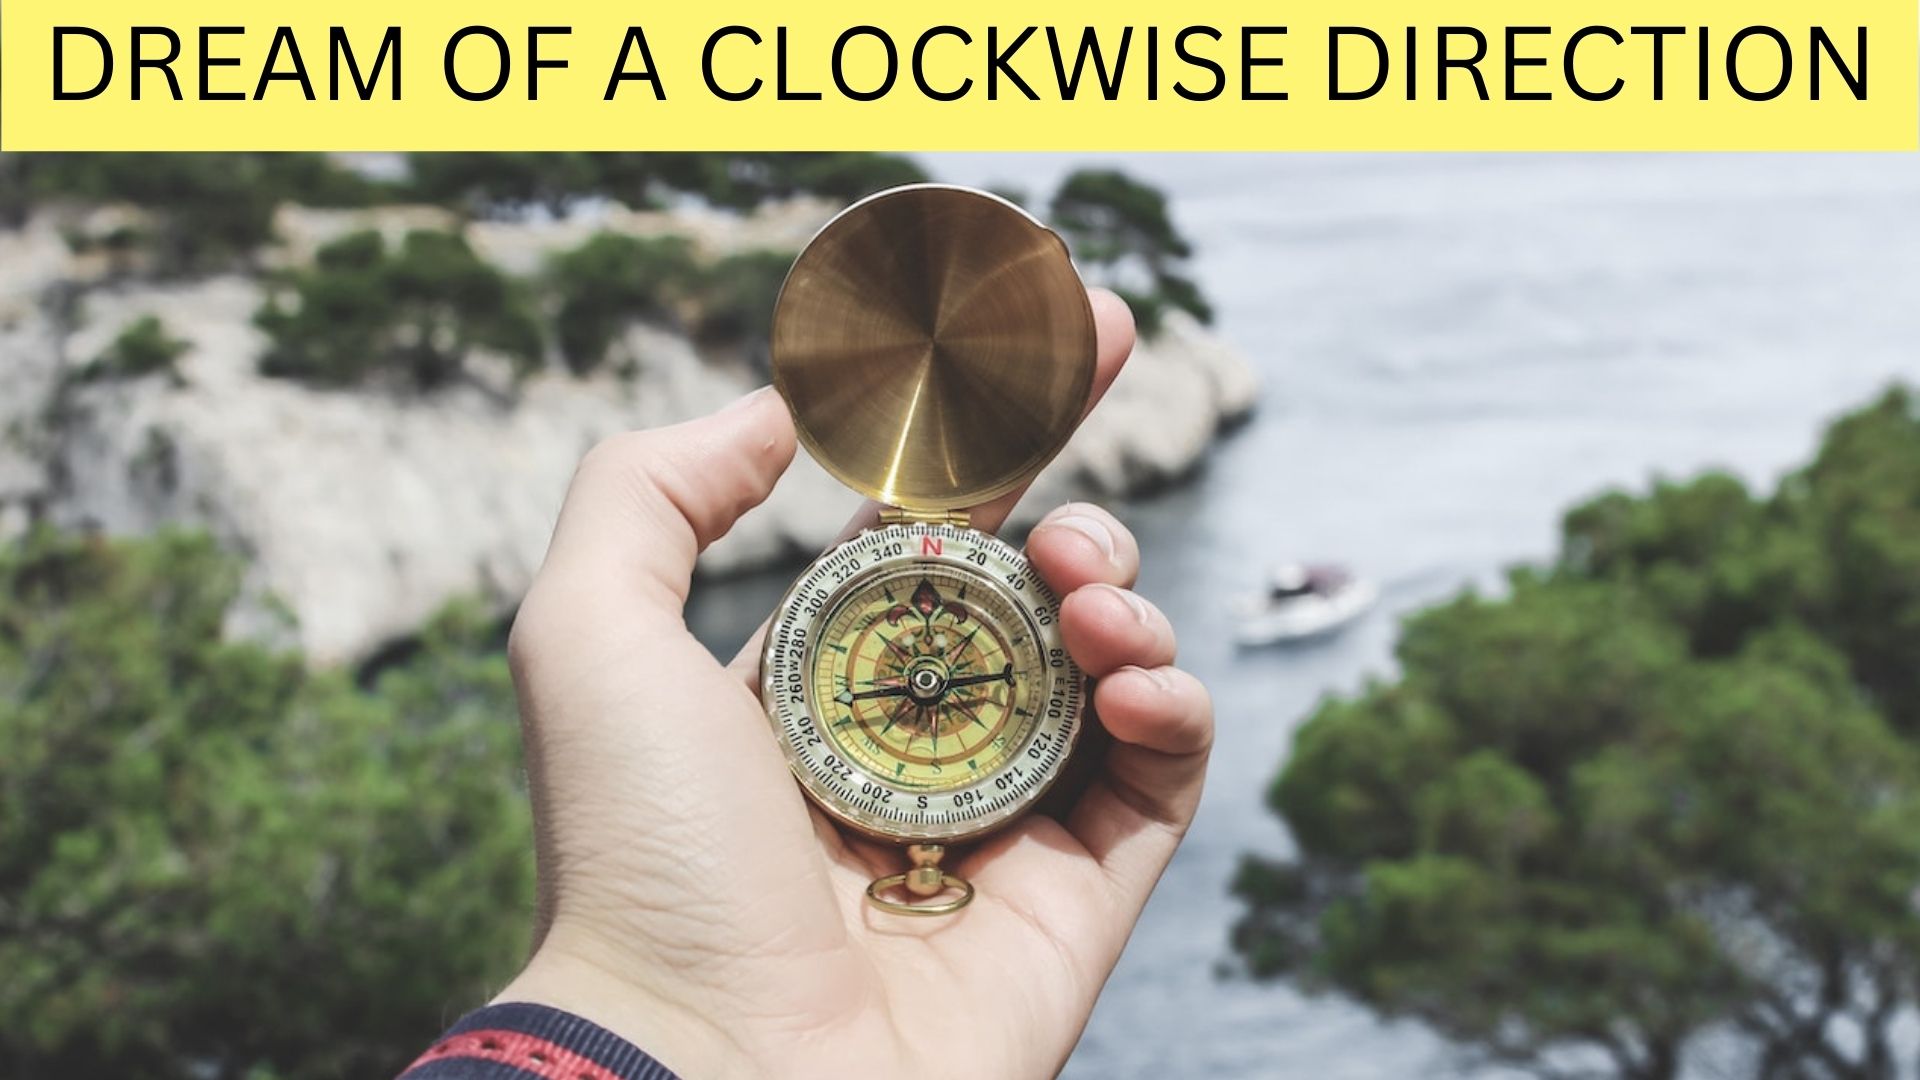 Dream Of A Clockwise Direction - Things Are Going As Planned